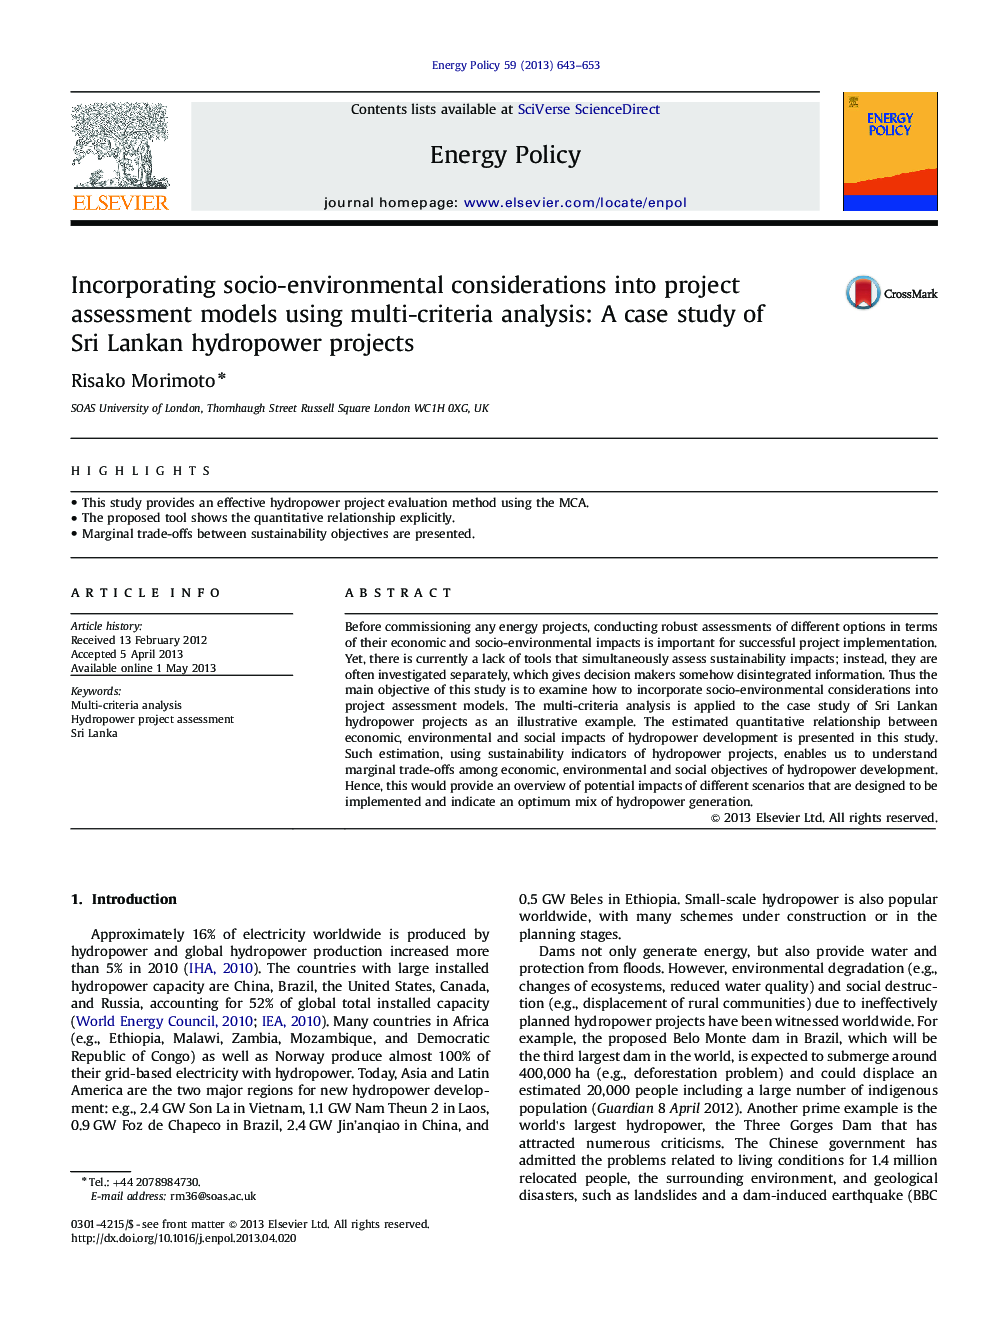 Incorporating socio-environmental considerations into project assessment models using multi-criteria analysis: A case study of Sri Lankan hydropower projects